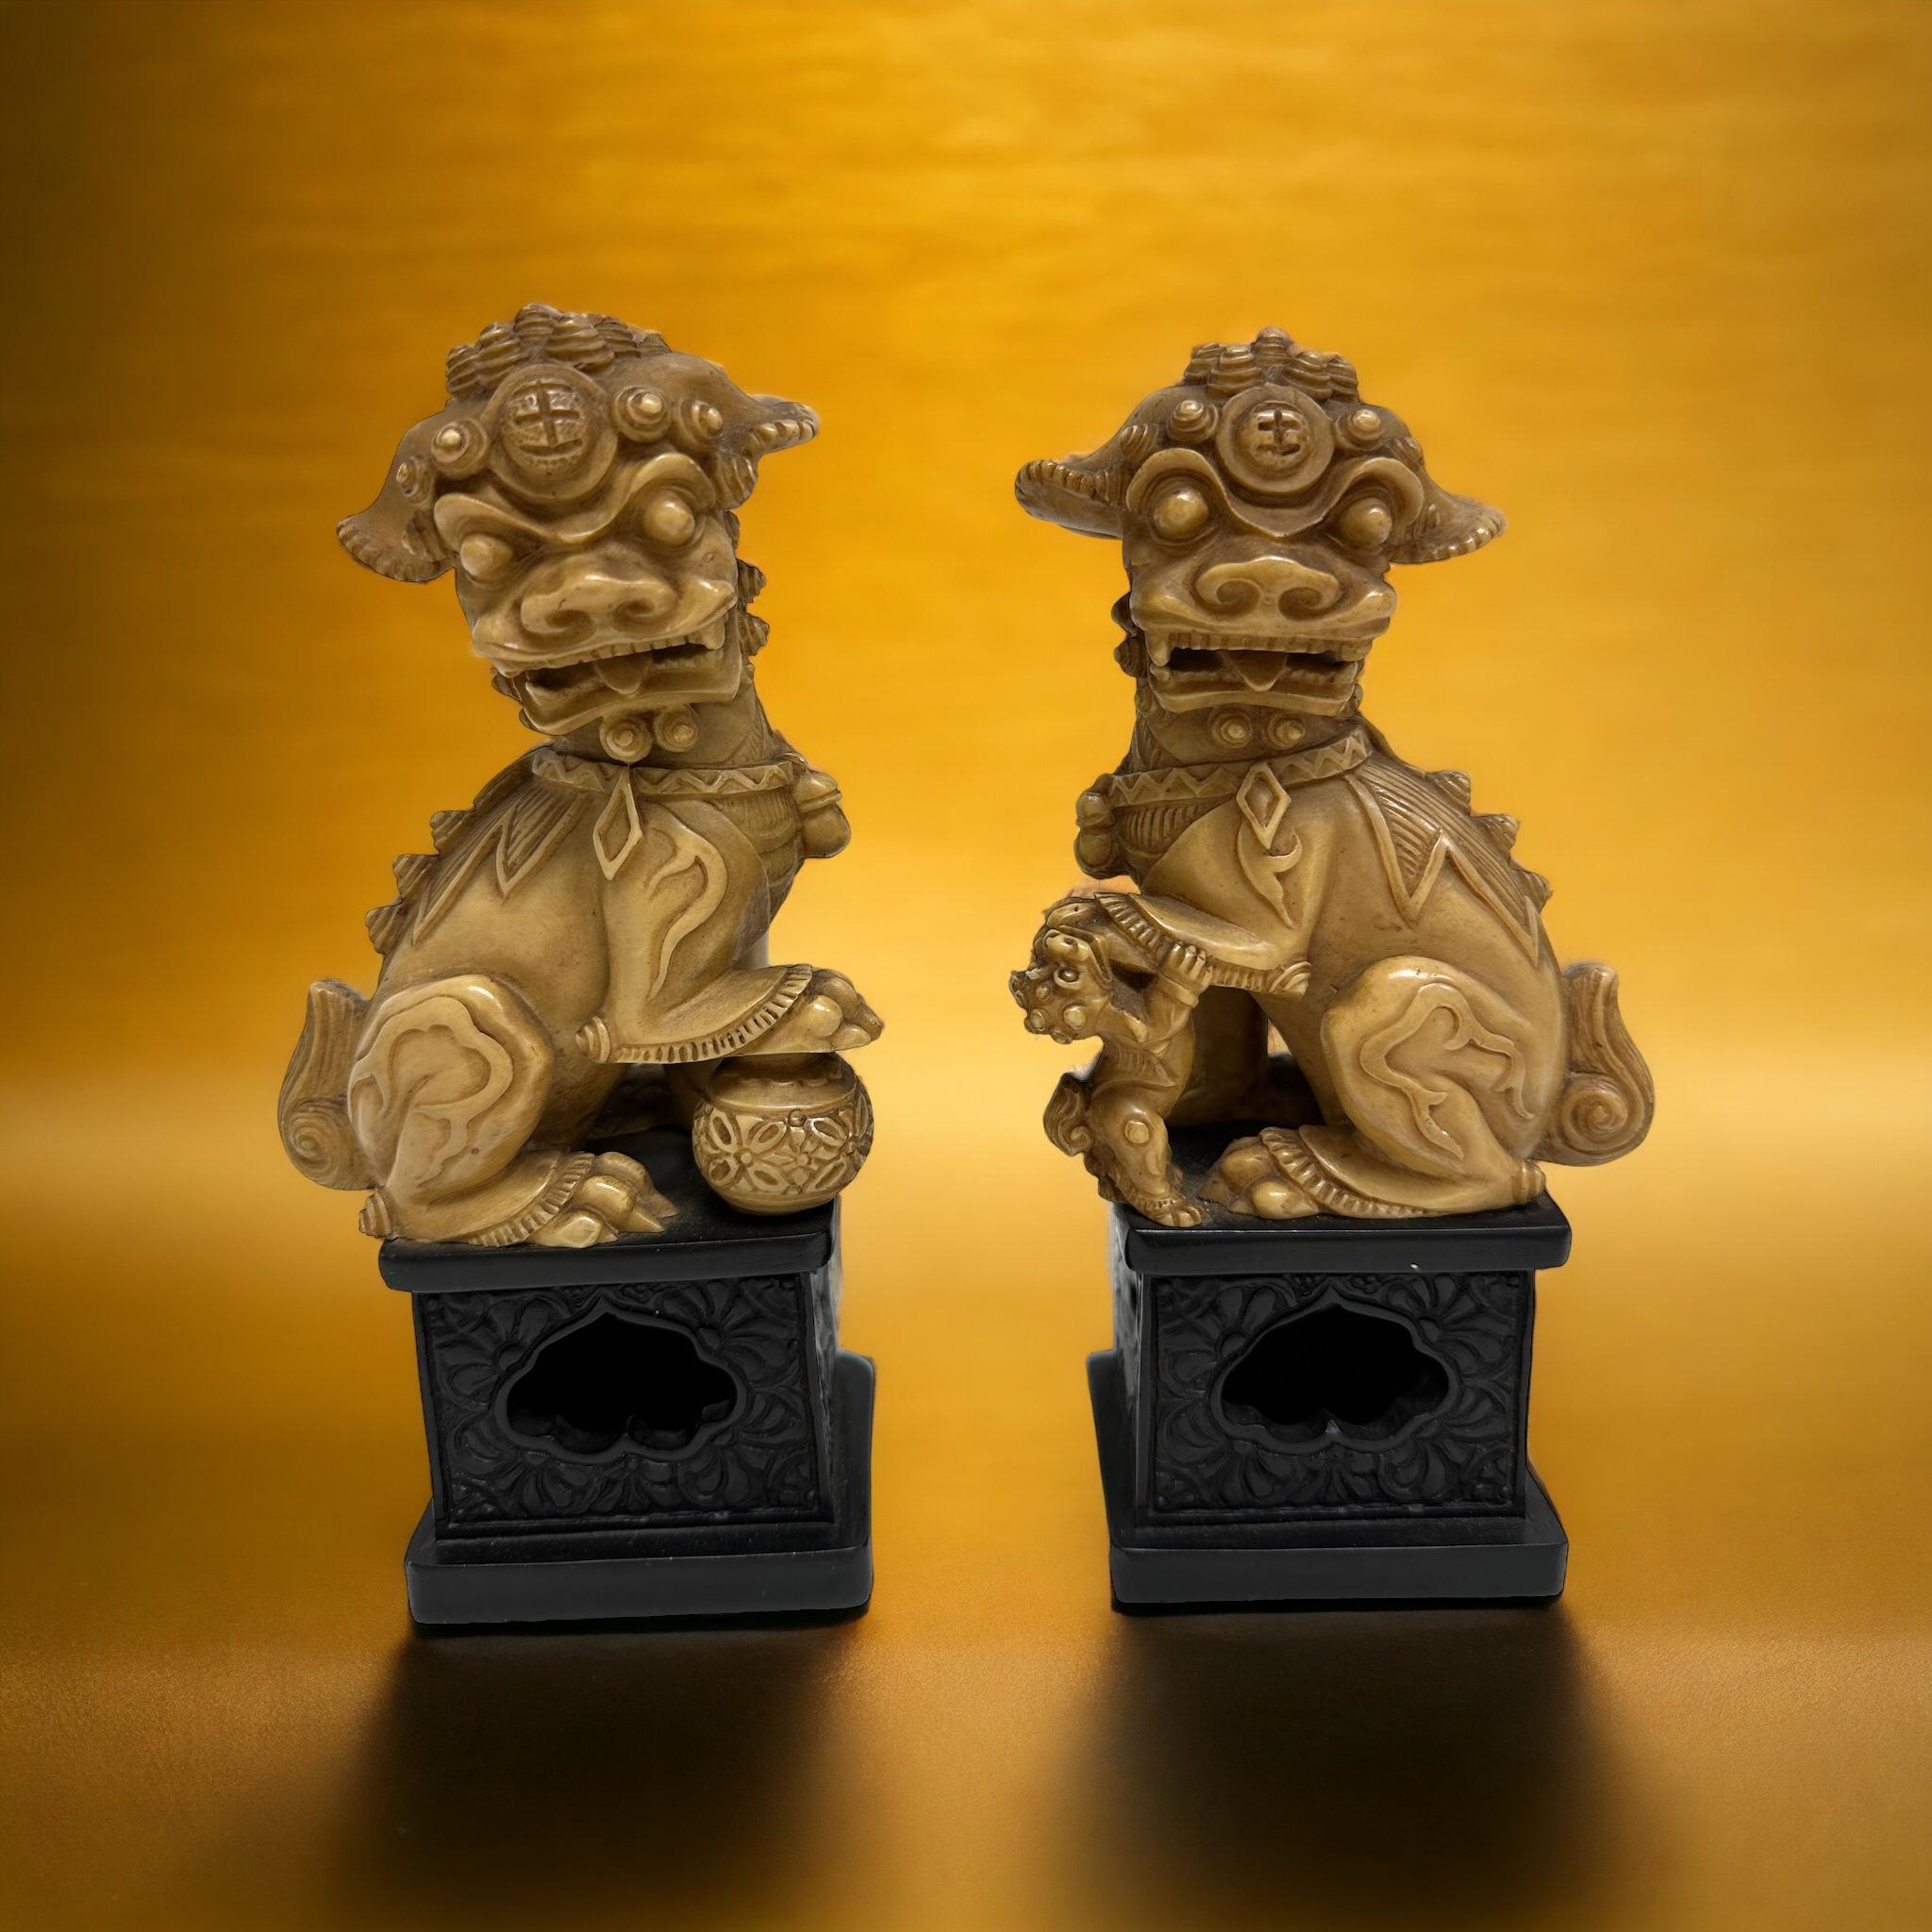 Offered is a pair of Foo Dog sculptures on a black base. These are a classic Asian decorative piece, they are made from soapstone. This type of sculpture typically depicts two guardian lions, one male and one female, standing on a pedestal and said